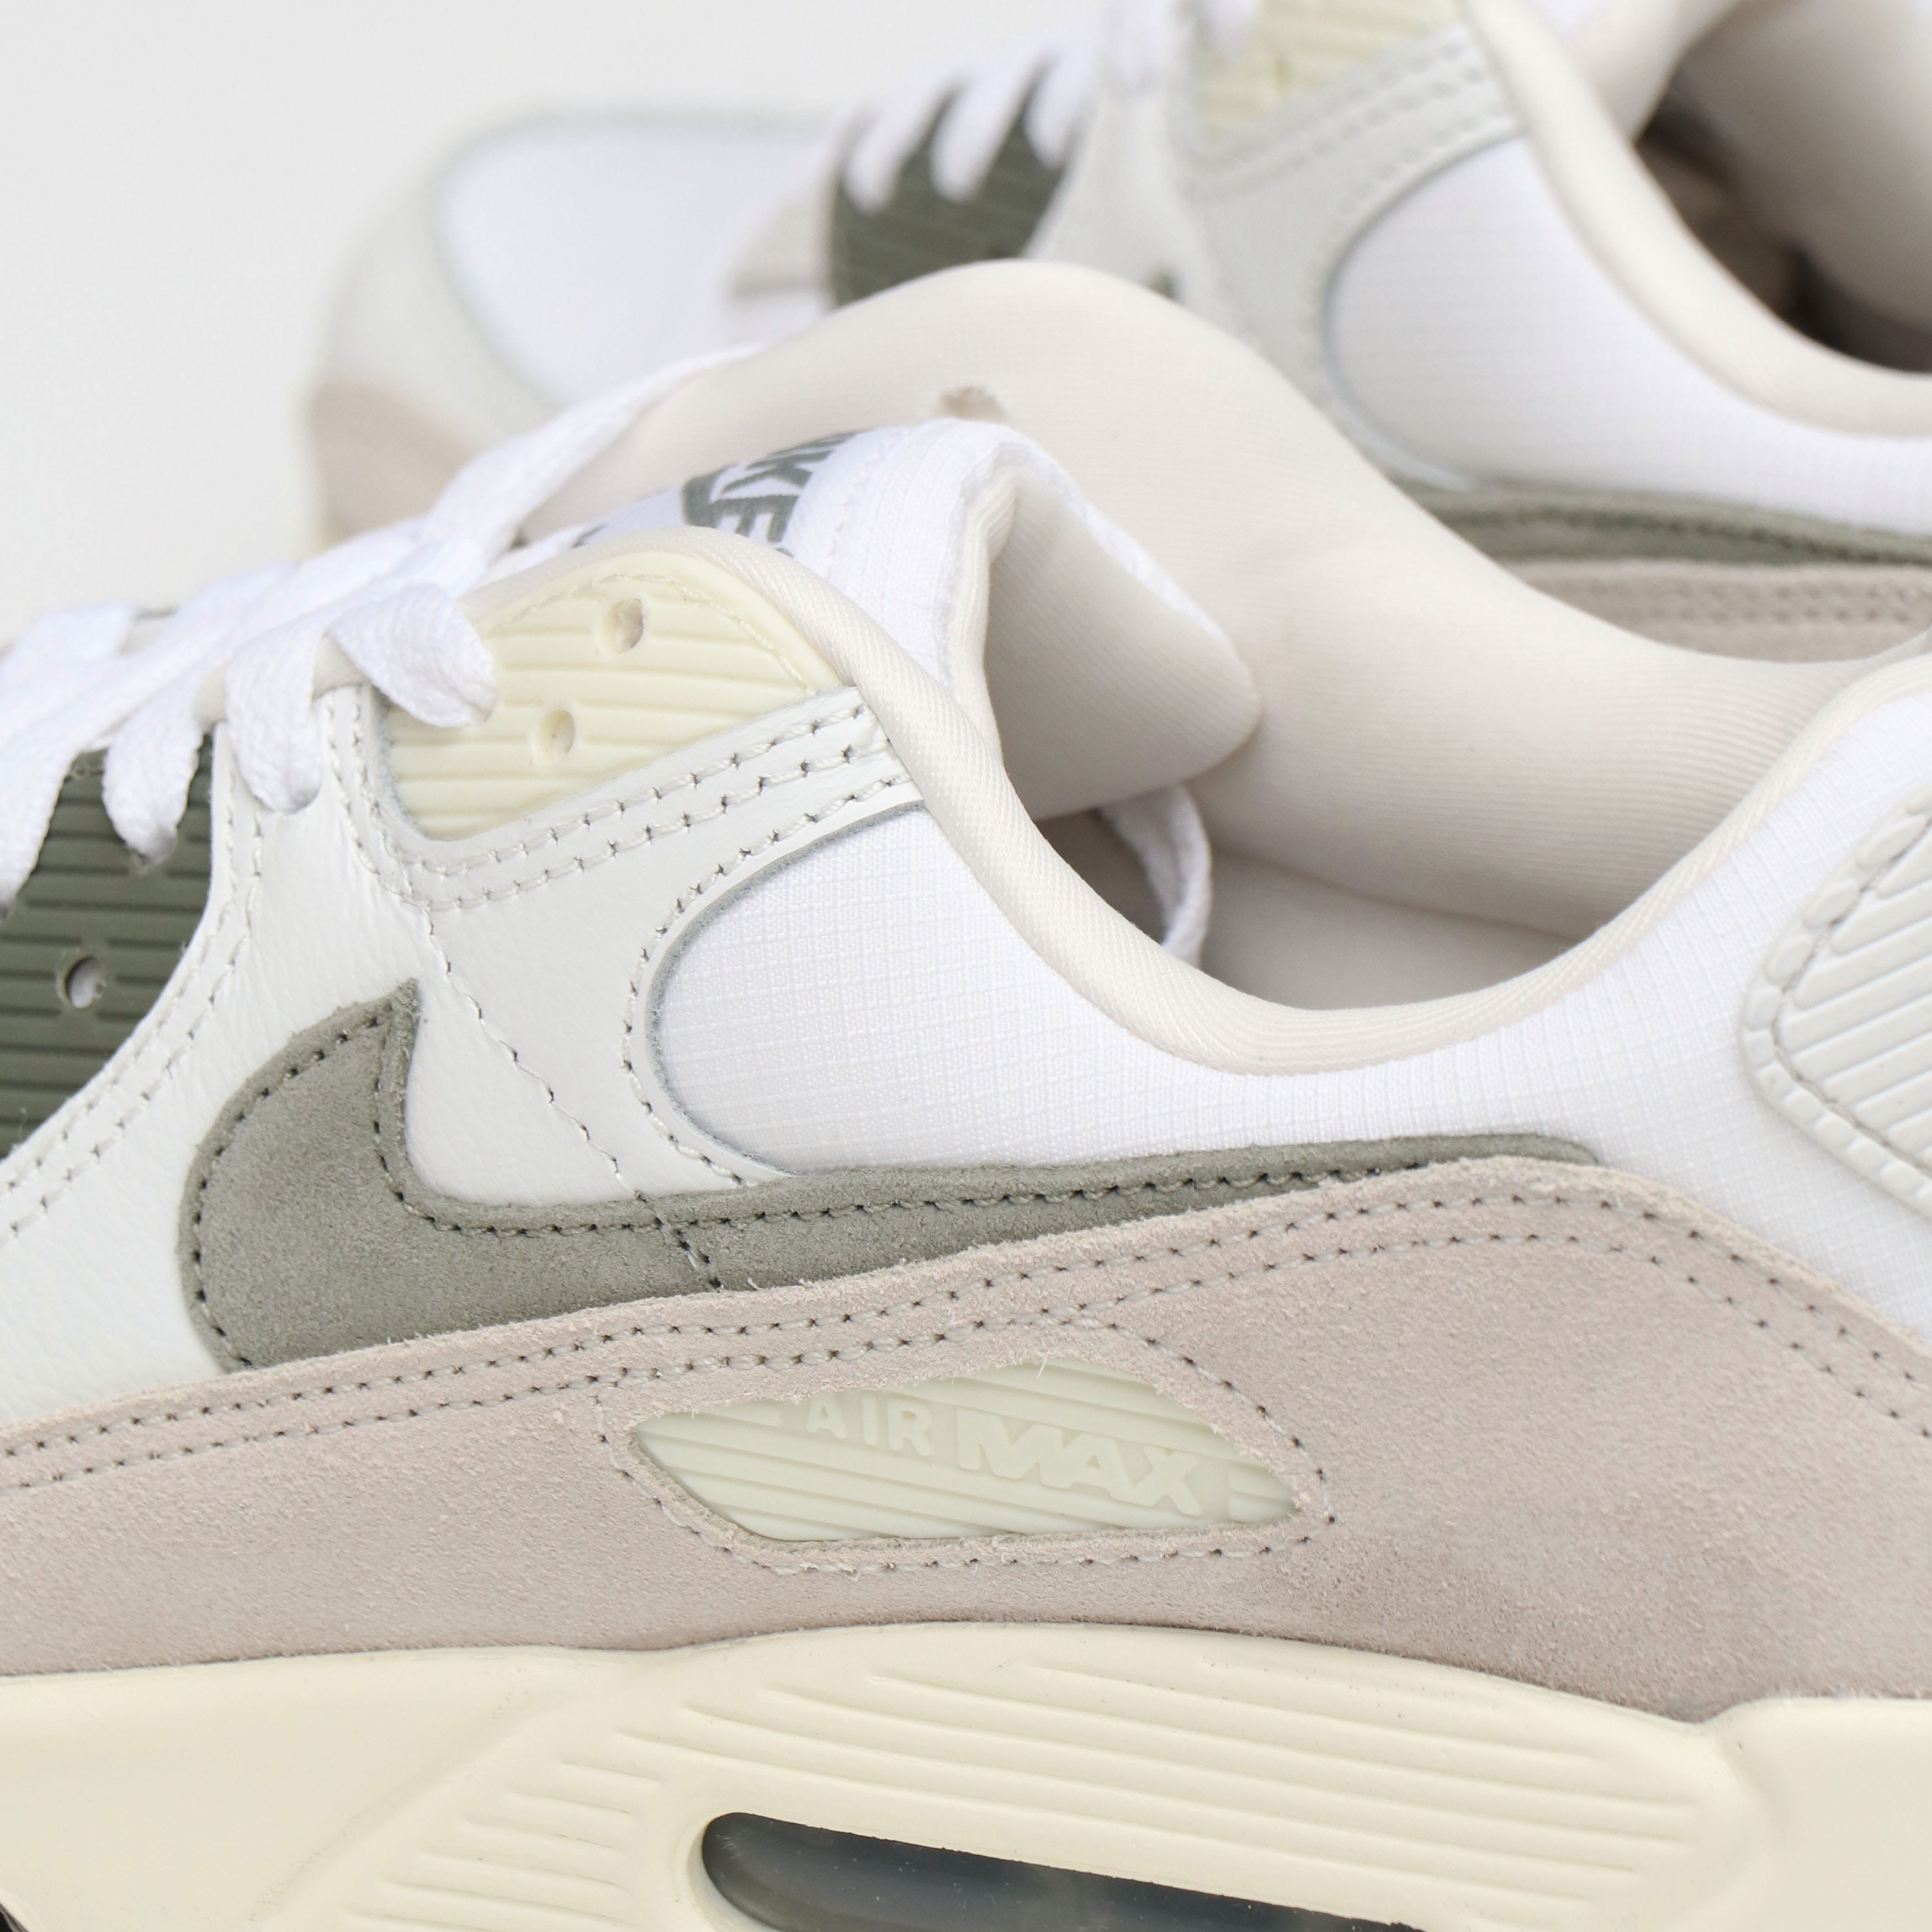 AIR MAX 90 SE – TIME AFTER TIME